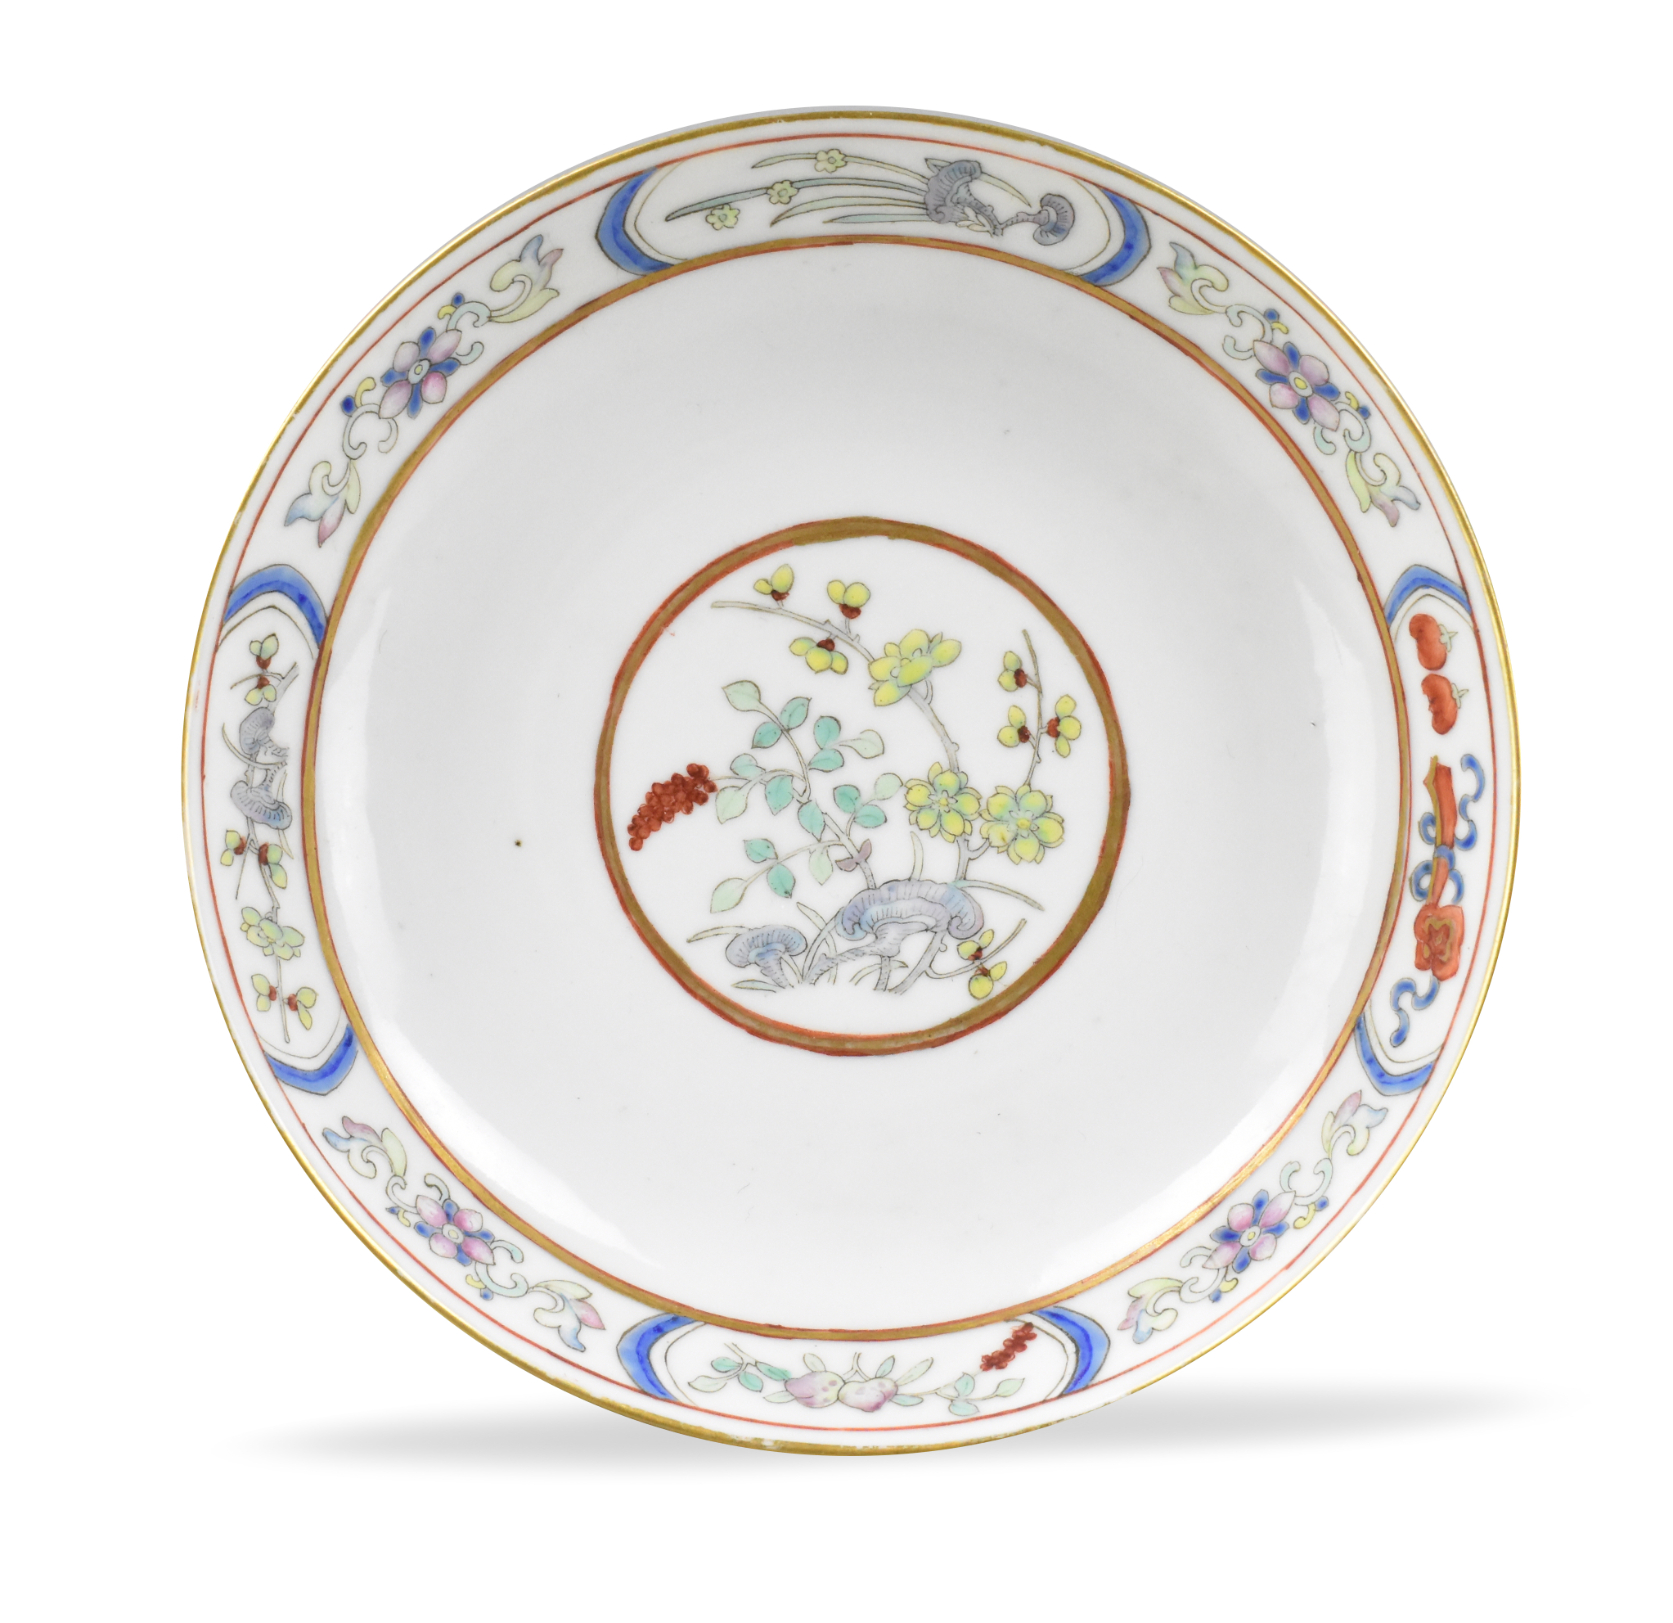 CHINESE ENAMELED FAMILLE ROSE PLATE 33a08c